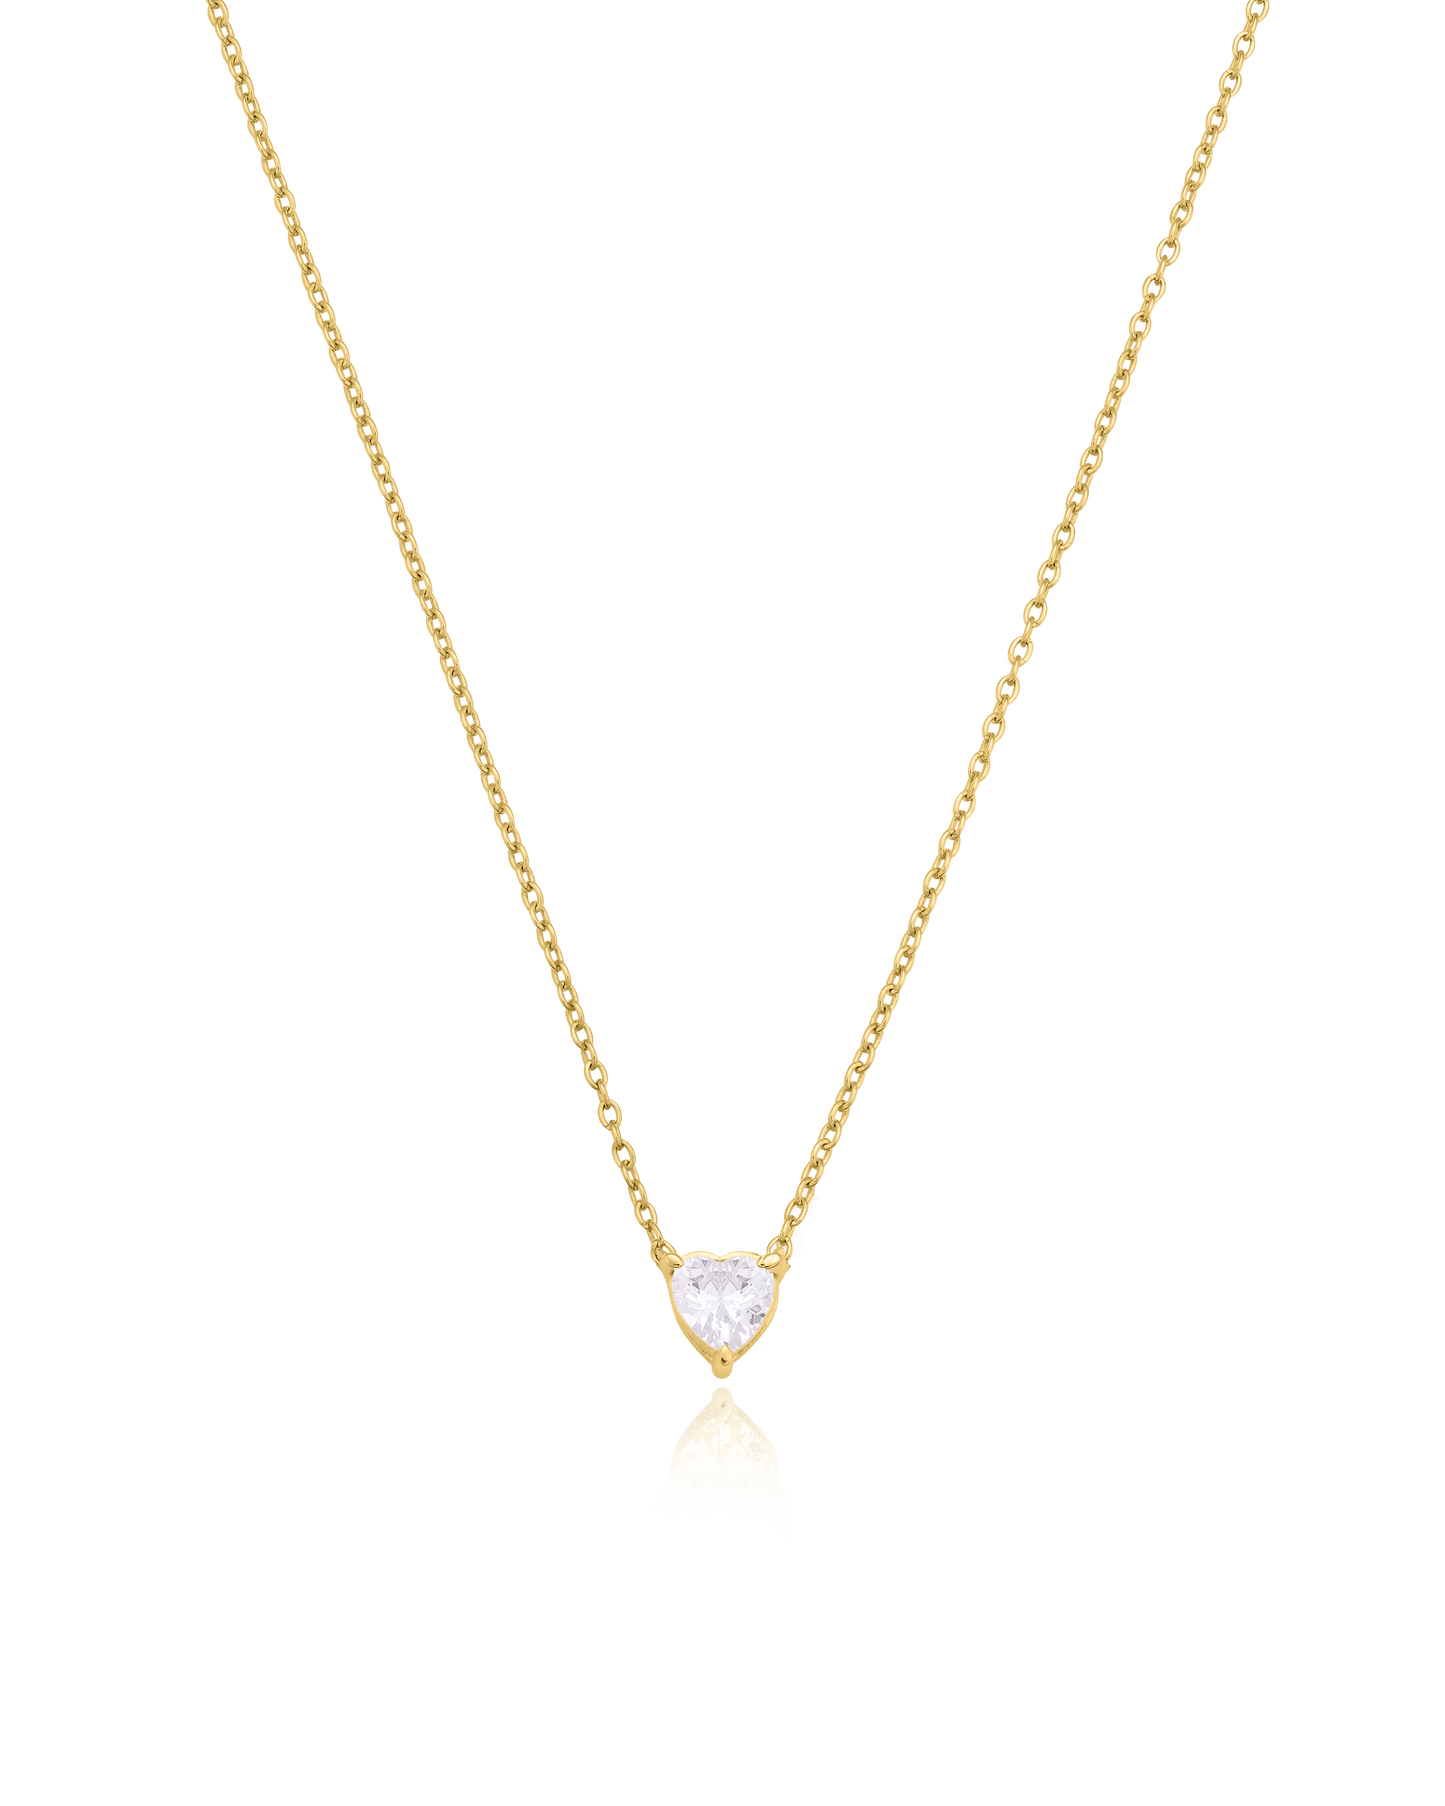 Heart Solitaire Diamond Necklace - 14K Yellow Gold Necklaces magal-dev 0.10 CT 16” 